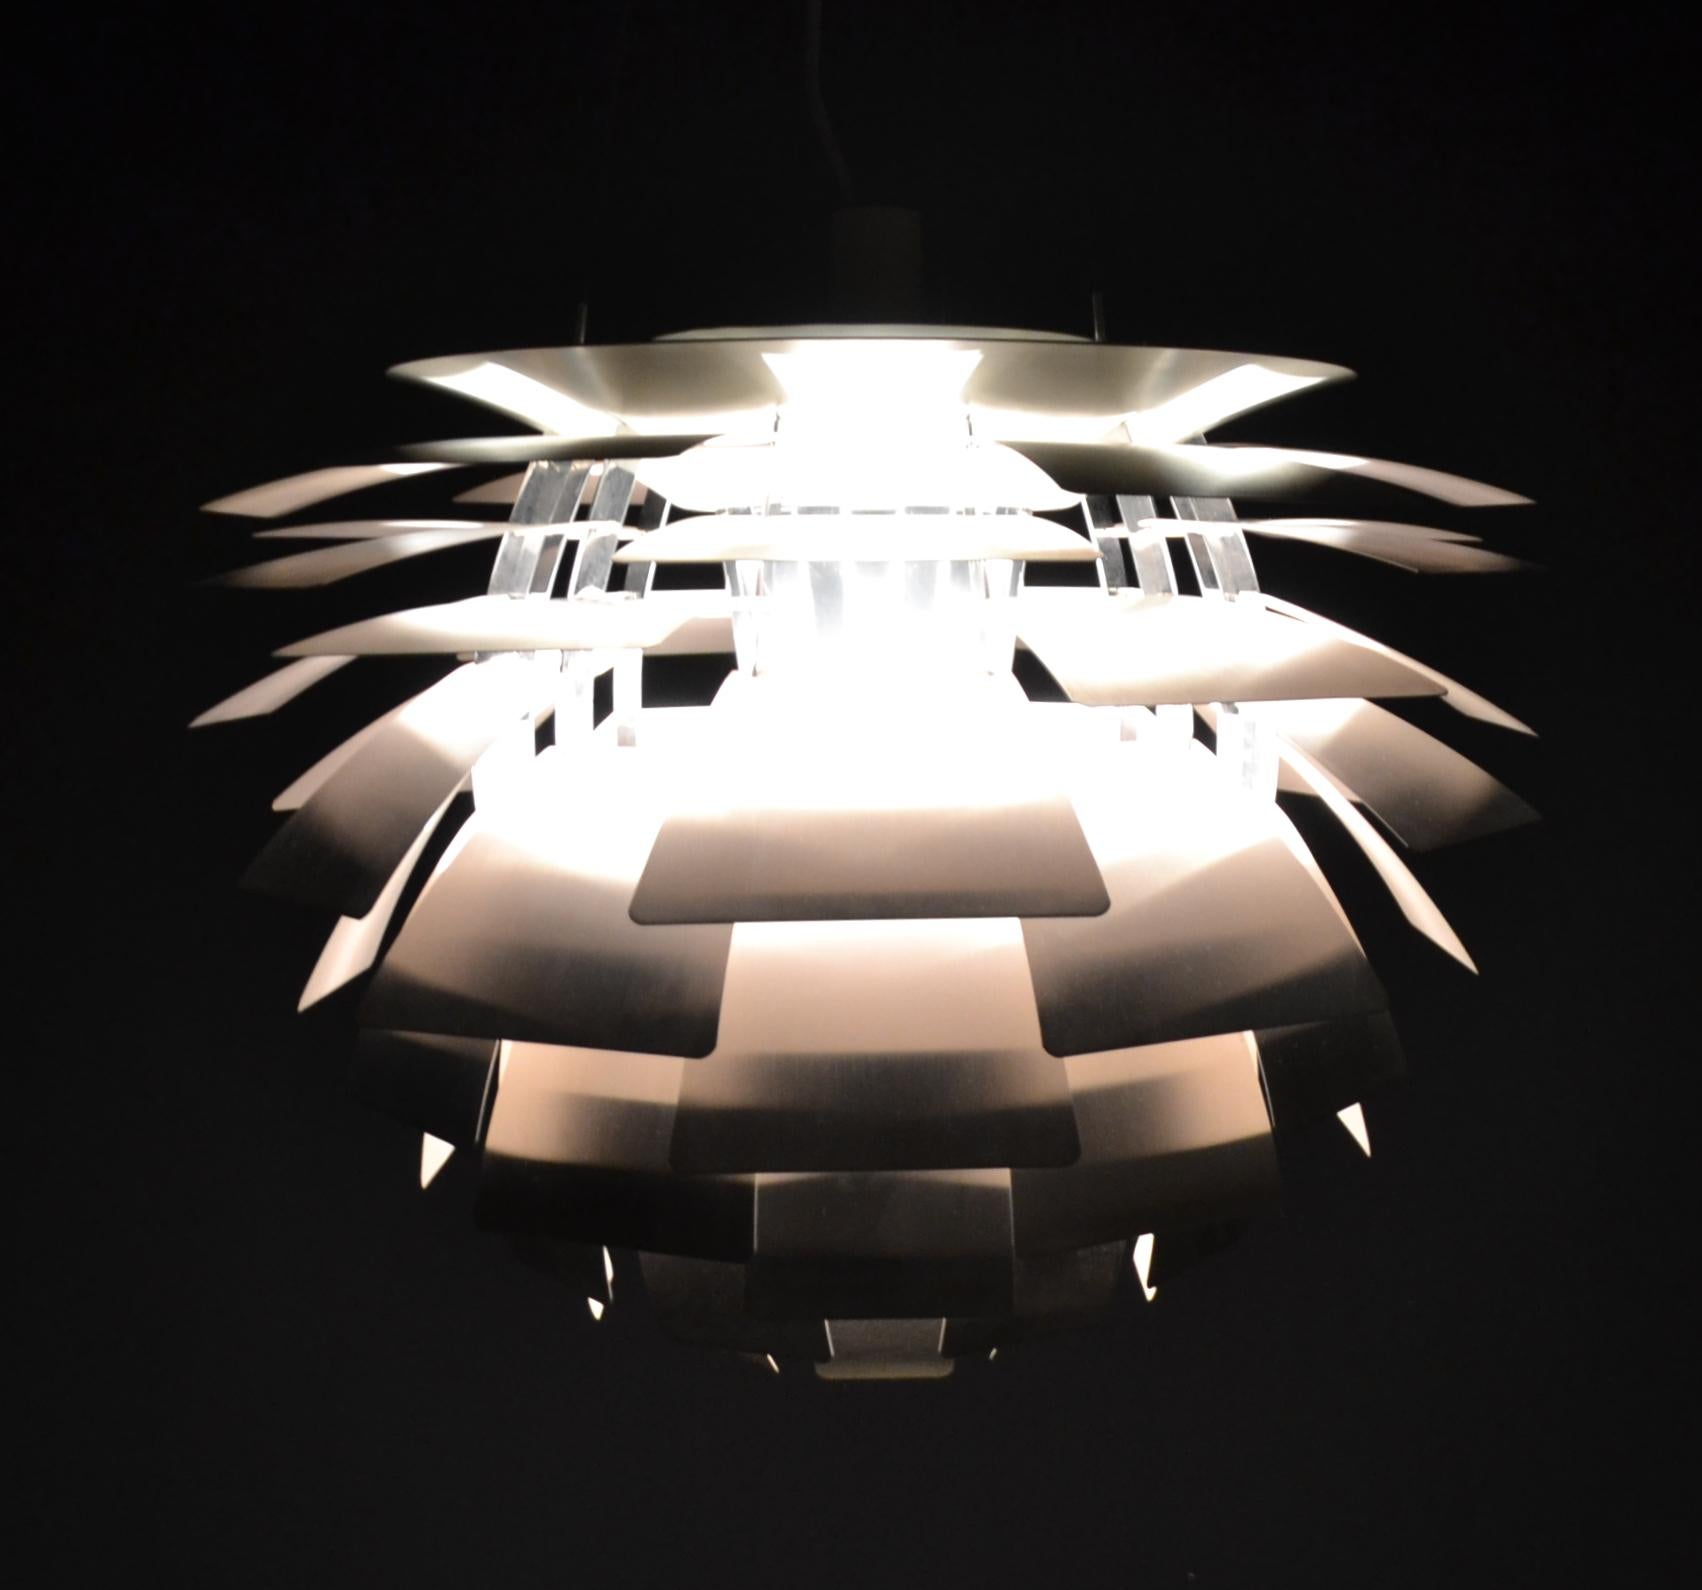 Design: Poul Henningsen
Design: from 1958
Manufacturer: Louis Poulsen
Condition: used
Model: PH Arichoke
Leaves inside white painted metal, outside stainless steel 
The lamp hangs on three steel cables.
E40 socket for max 300 watt bulb.
A